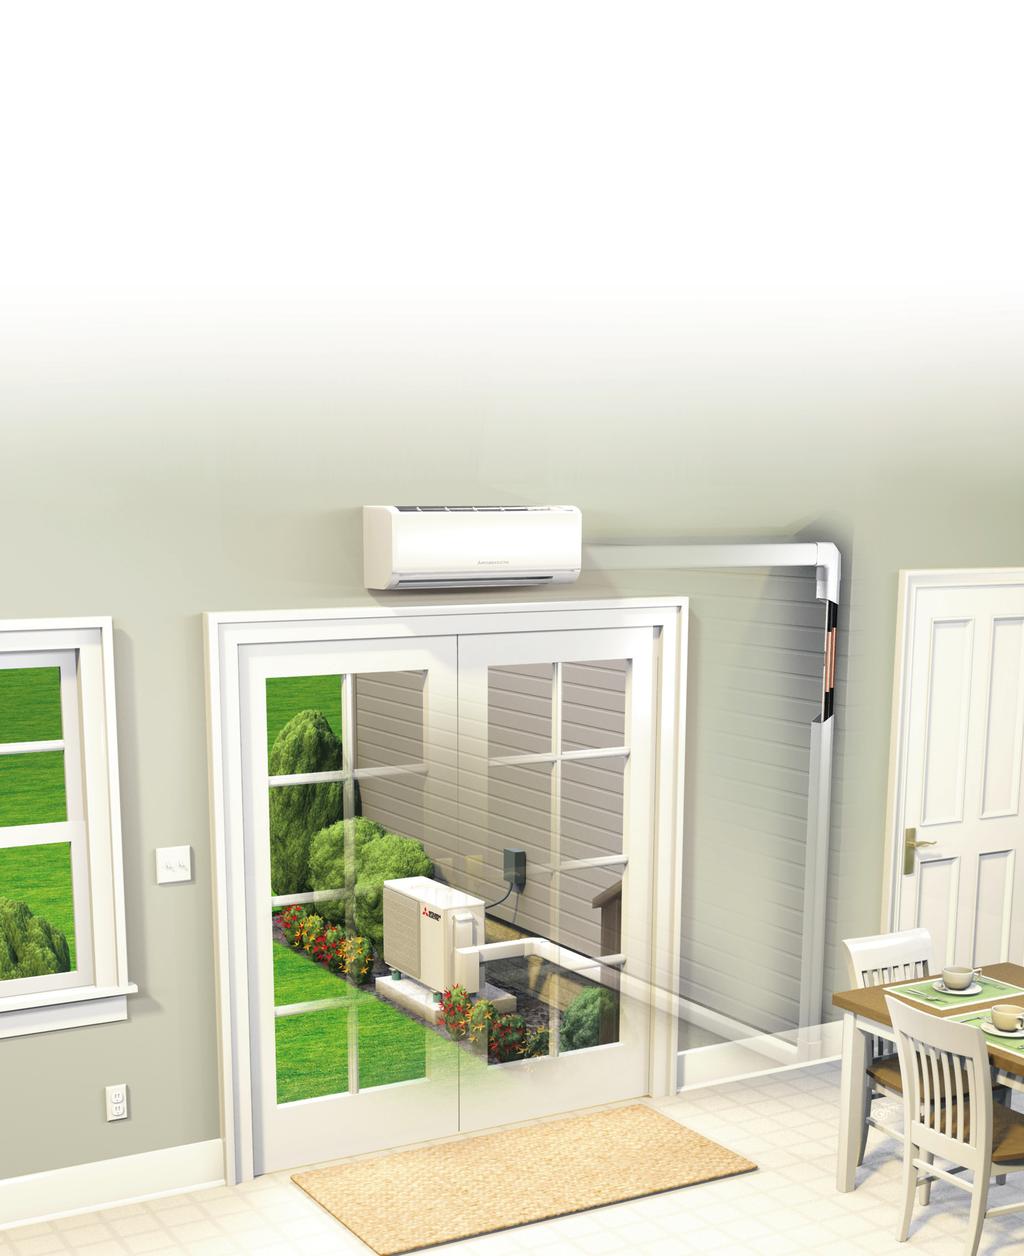 HOW OUR DUCTLESS SYSTEM WORKS Ductless heat pump systems pump heated or cooled refrigerant directly to indoor air-handling units through small refrigerant pipes.